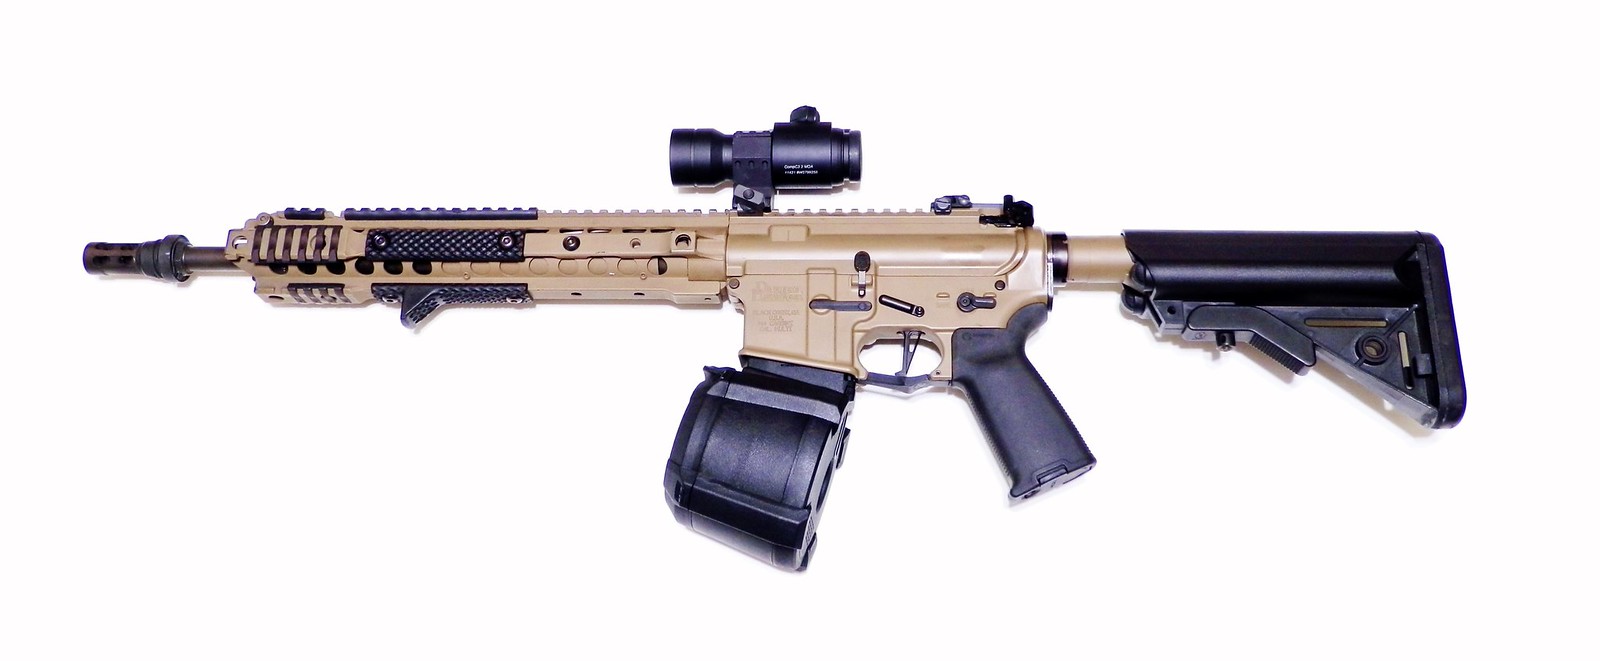 KAC picture threads - Page 187 - AR15.COM